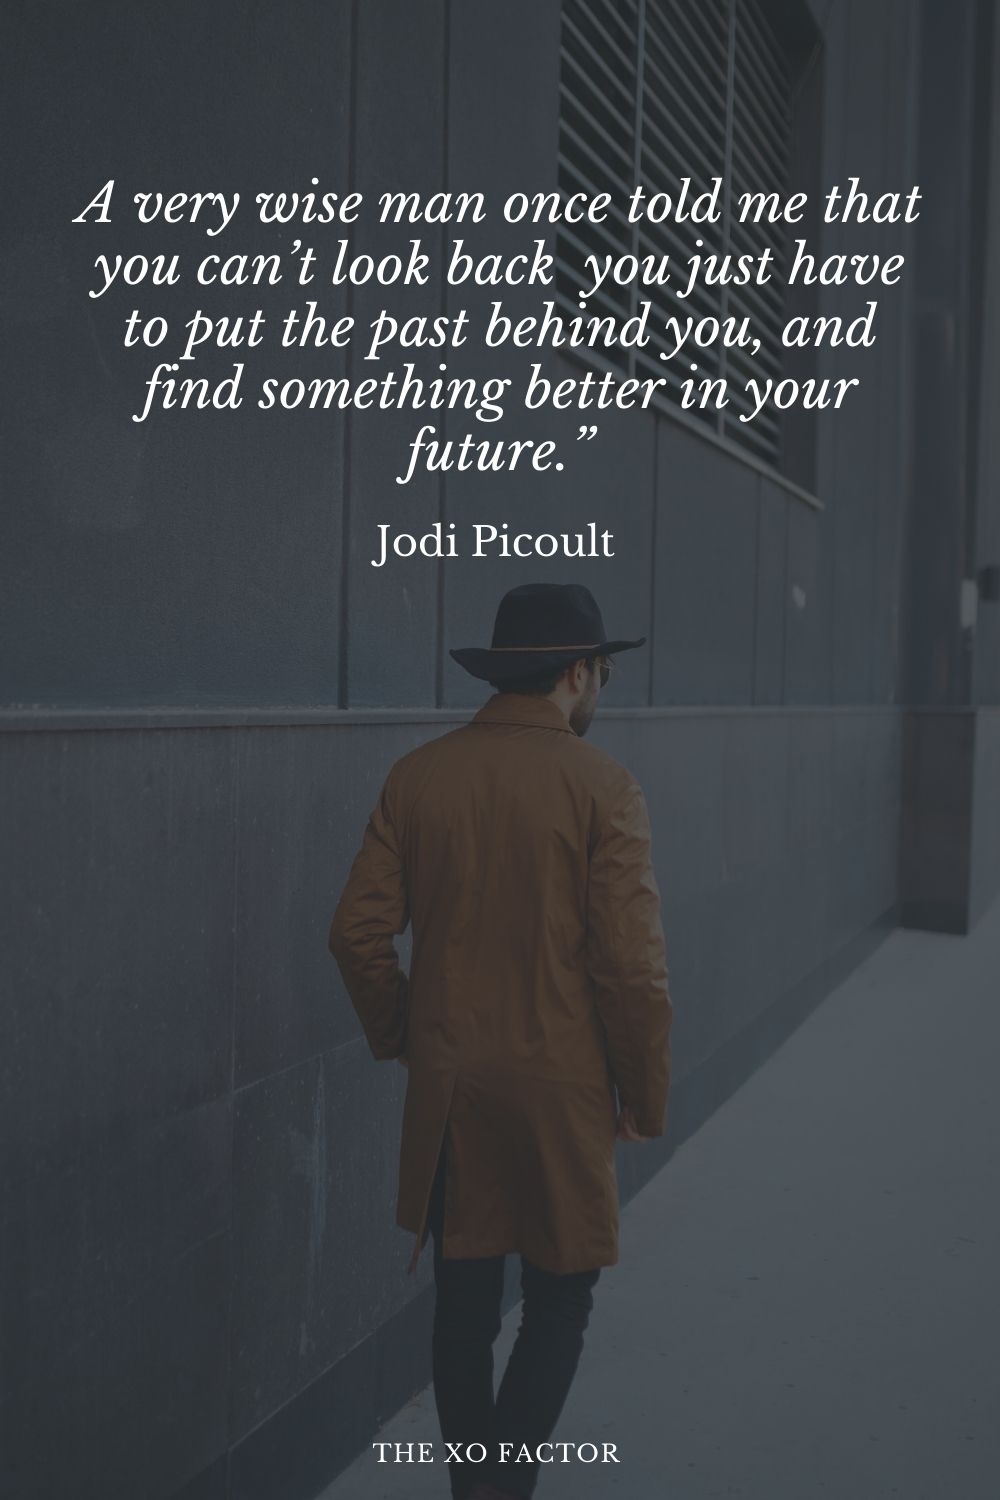 A very wise man once told me that you can’t look back – you just have to put the past behind you, and find something better in your future.” Jodi Picoult